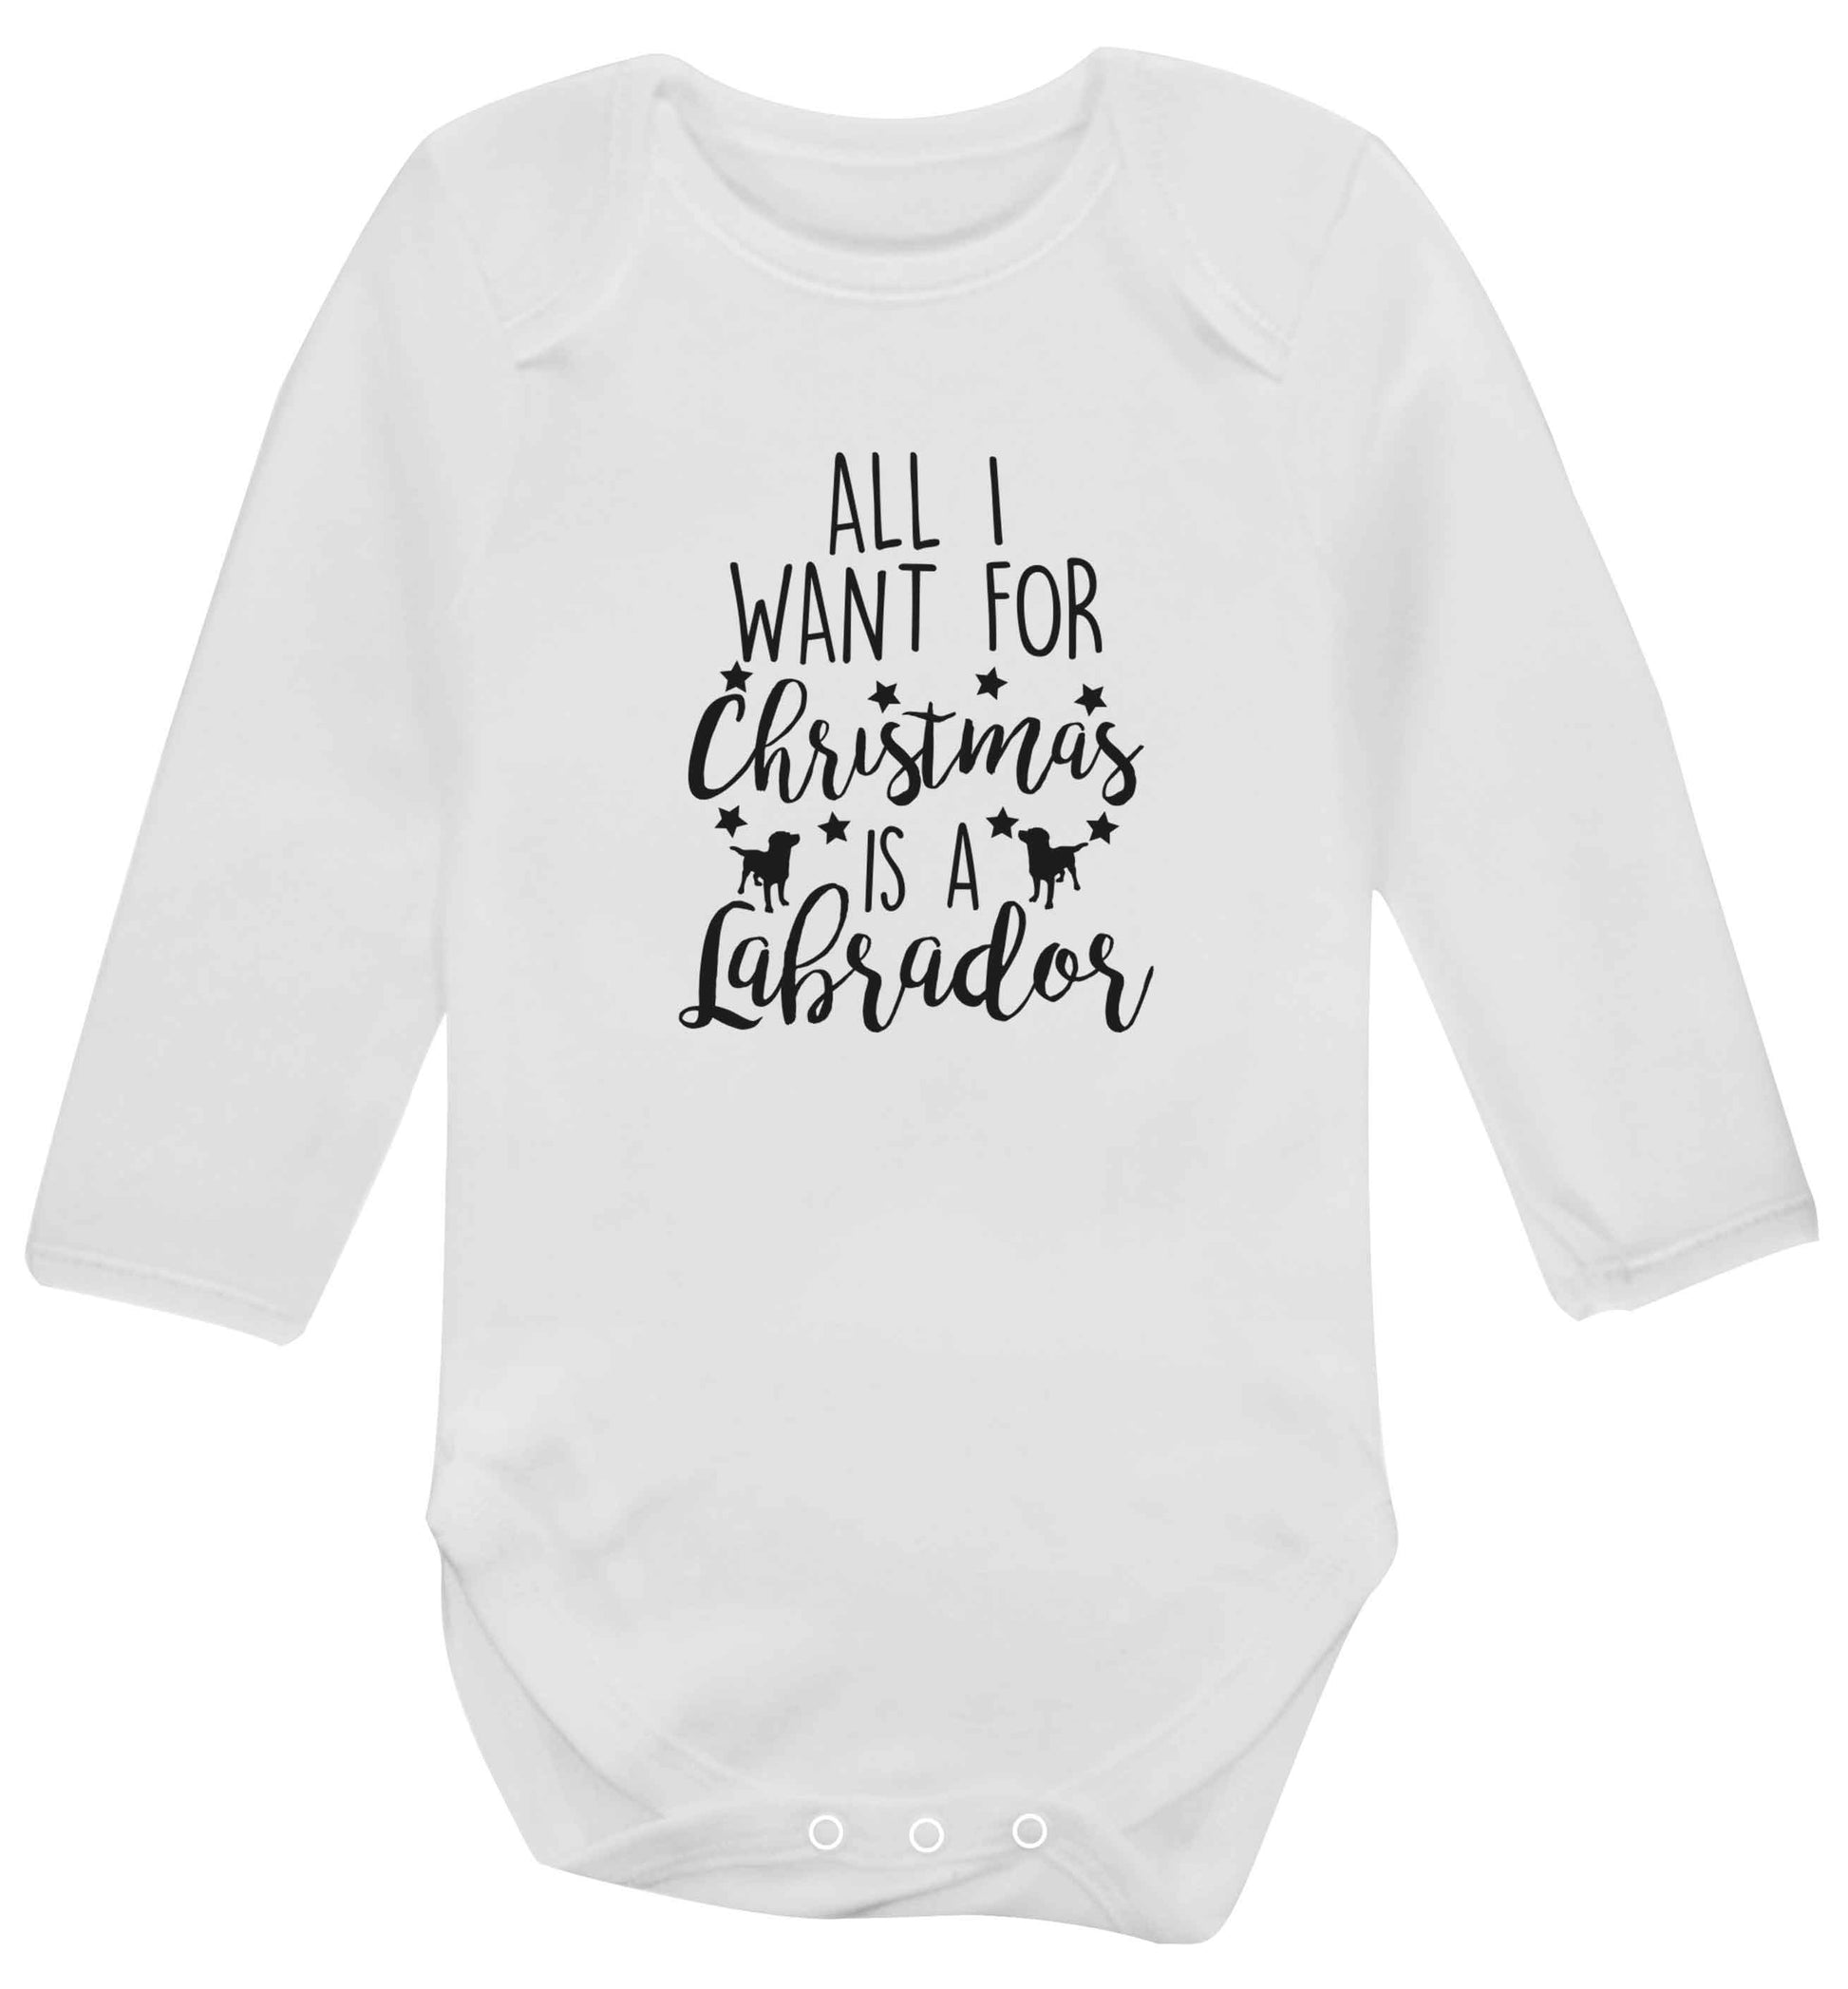 All I want for Christmas is a labrador baby vest long sleeved white 6-12 months